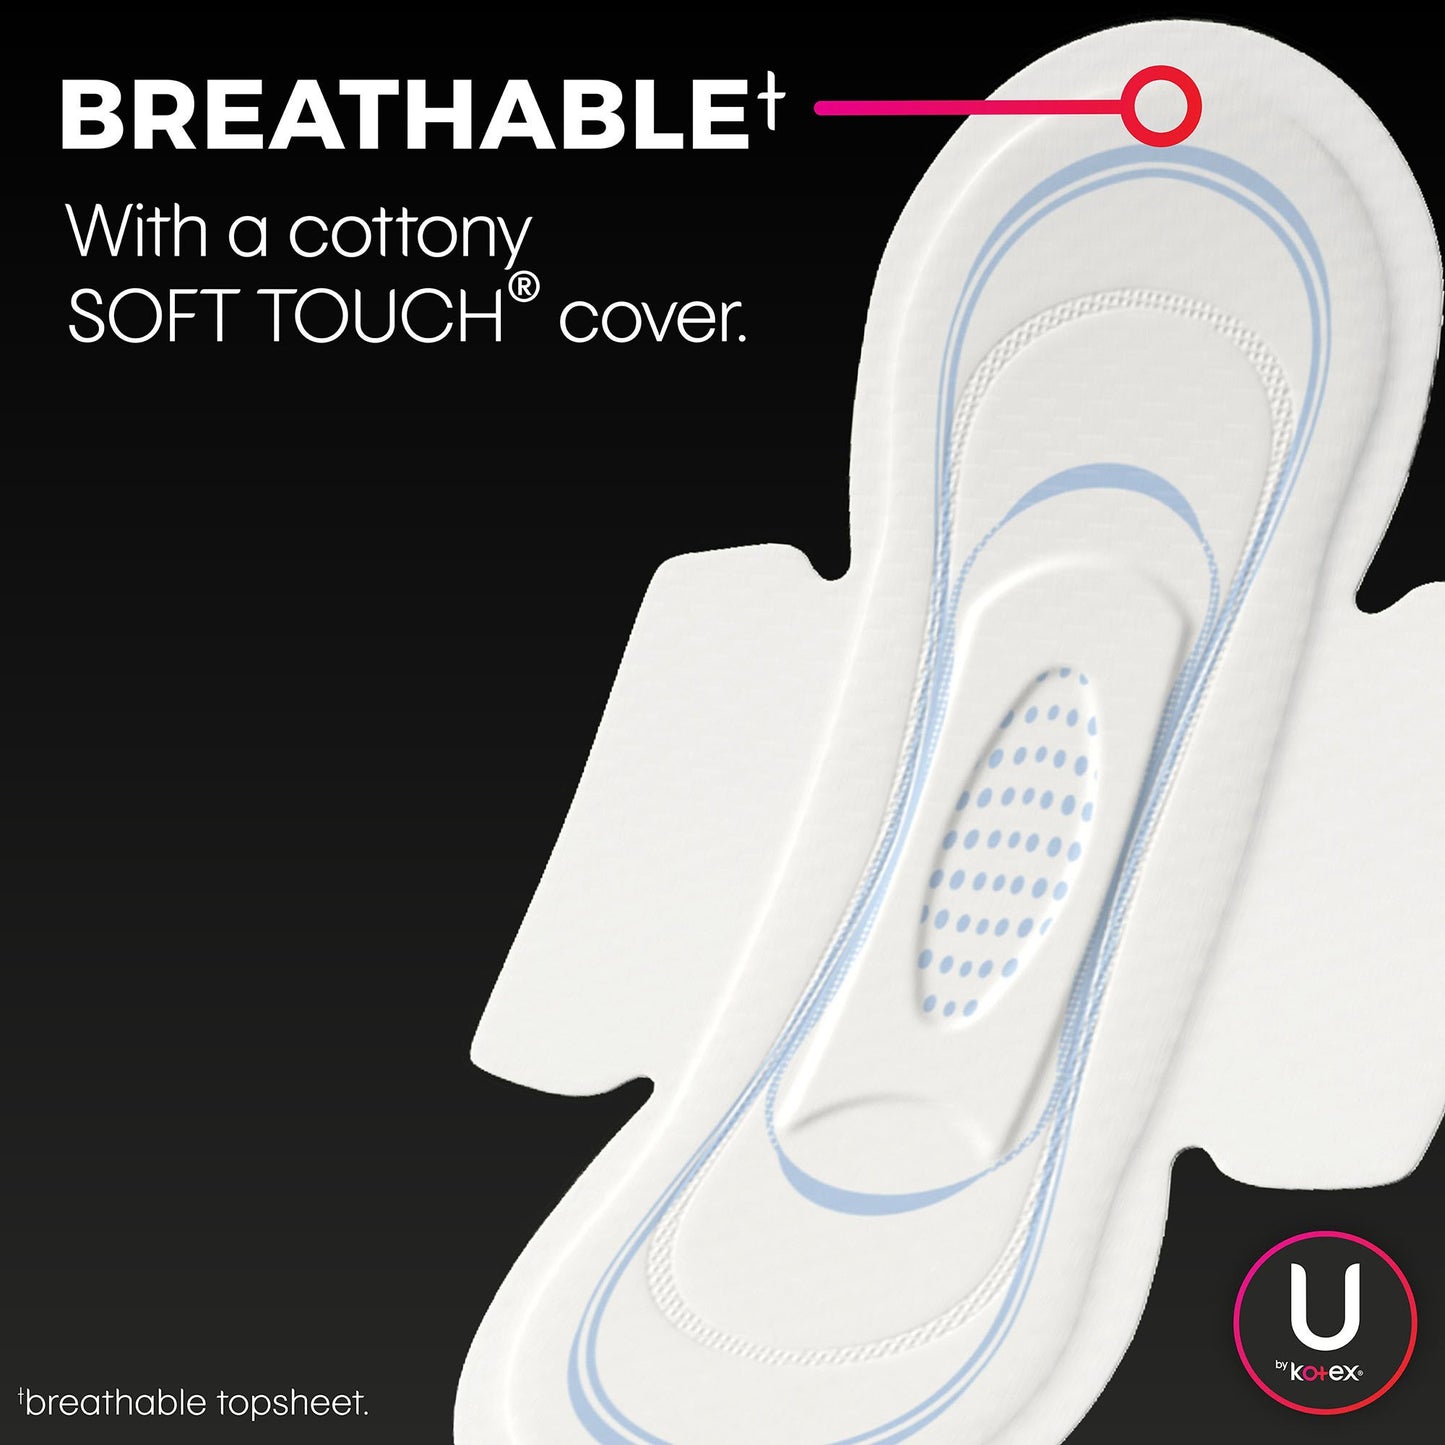 U by Kotex Security Ultra Thin Pads with Wings, Regular Absorbency, 36 ct